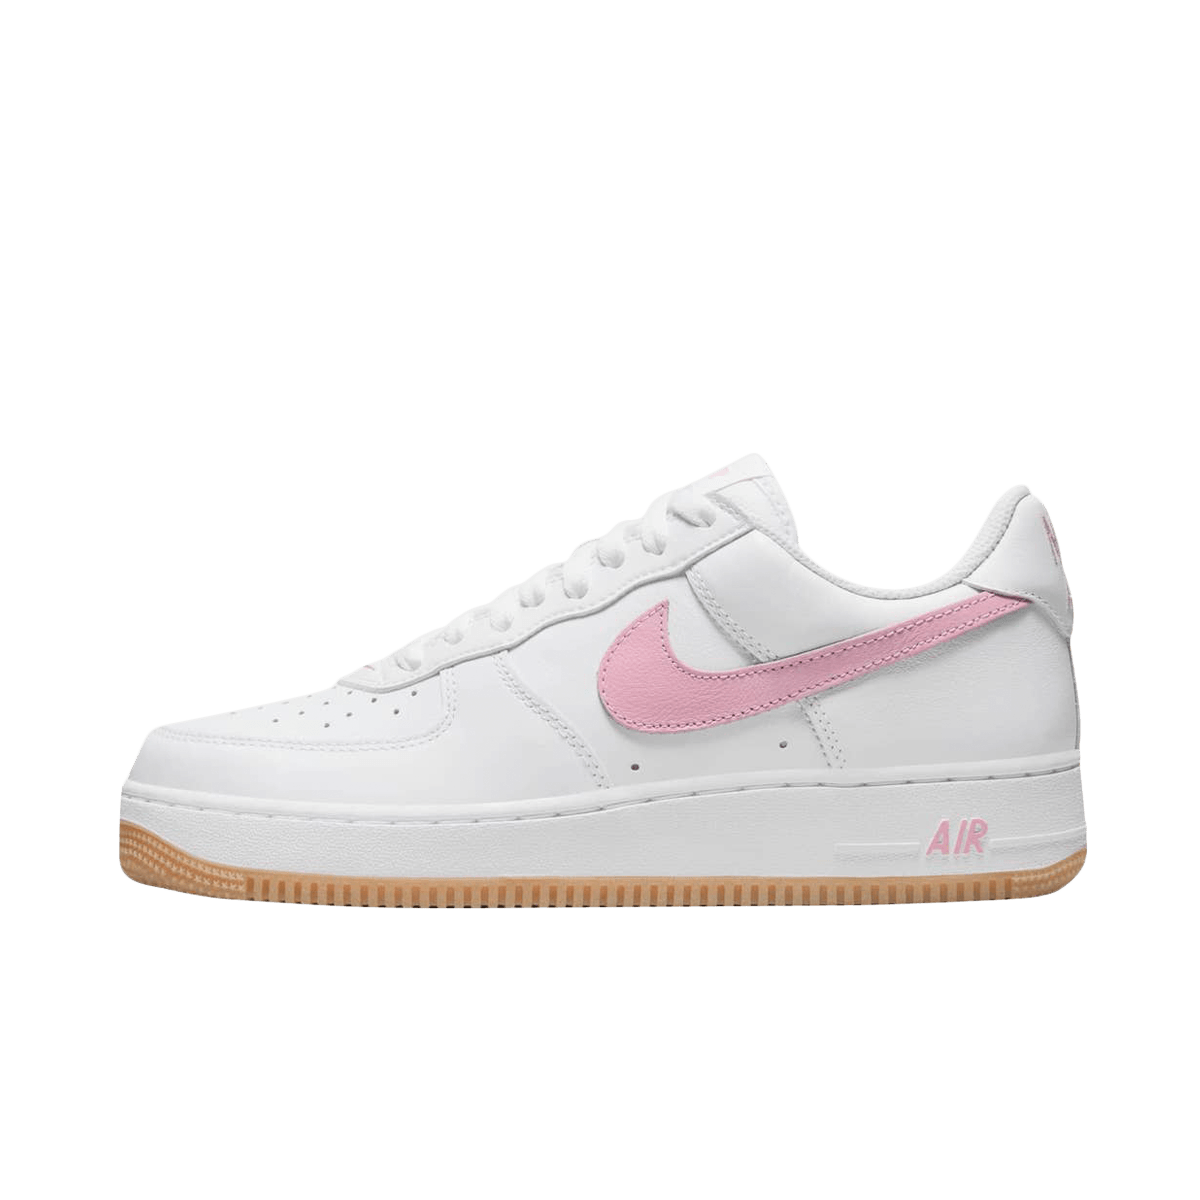 Nike Air Force 1 Low Retro 'Pink' - Anniversary Edition DM0576-101